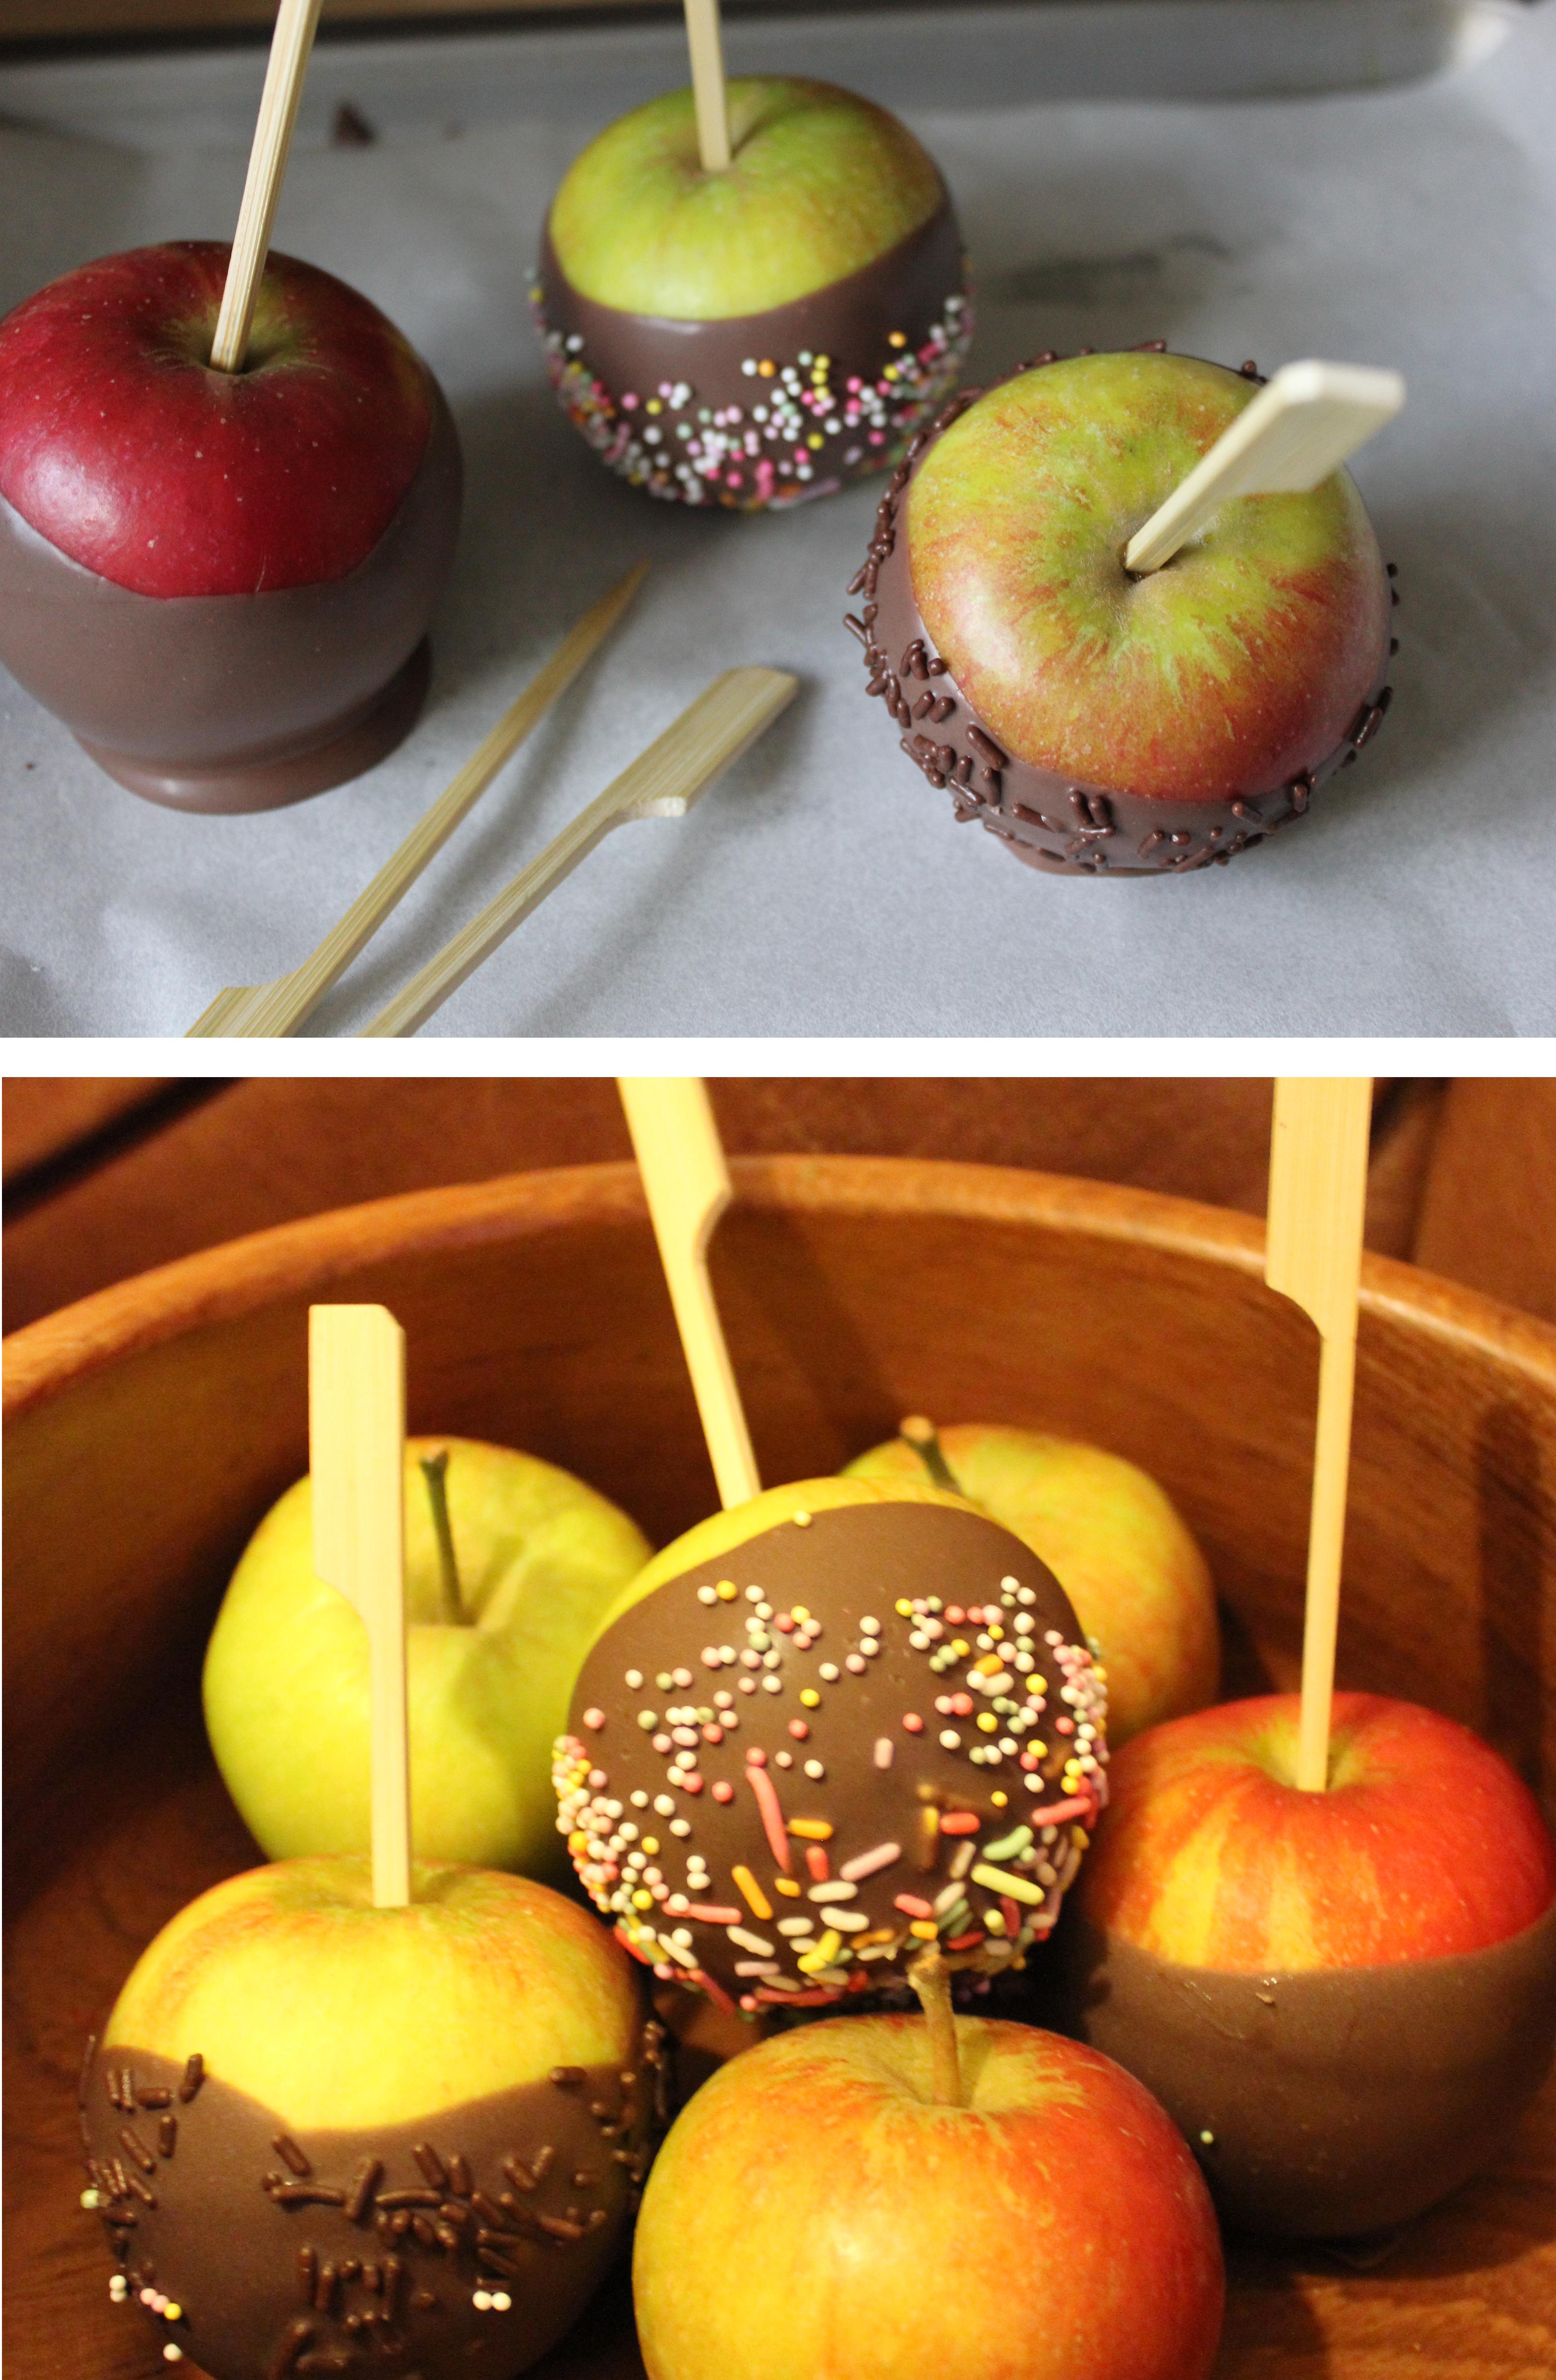 chocolate apples recipe for national chocolate week